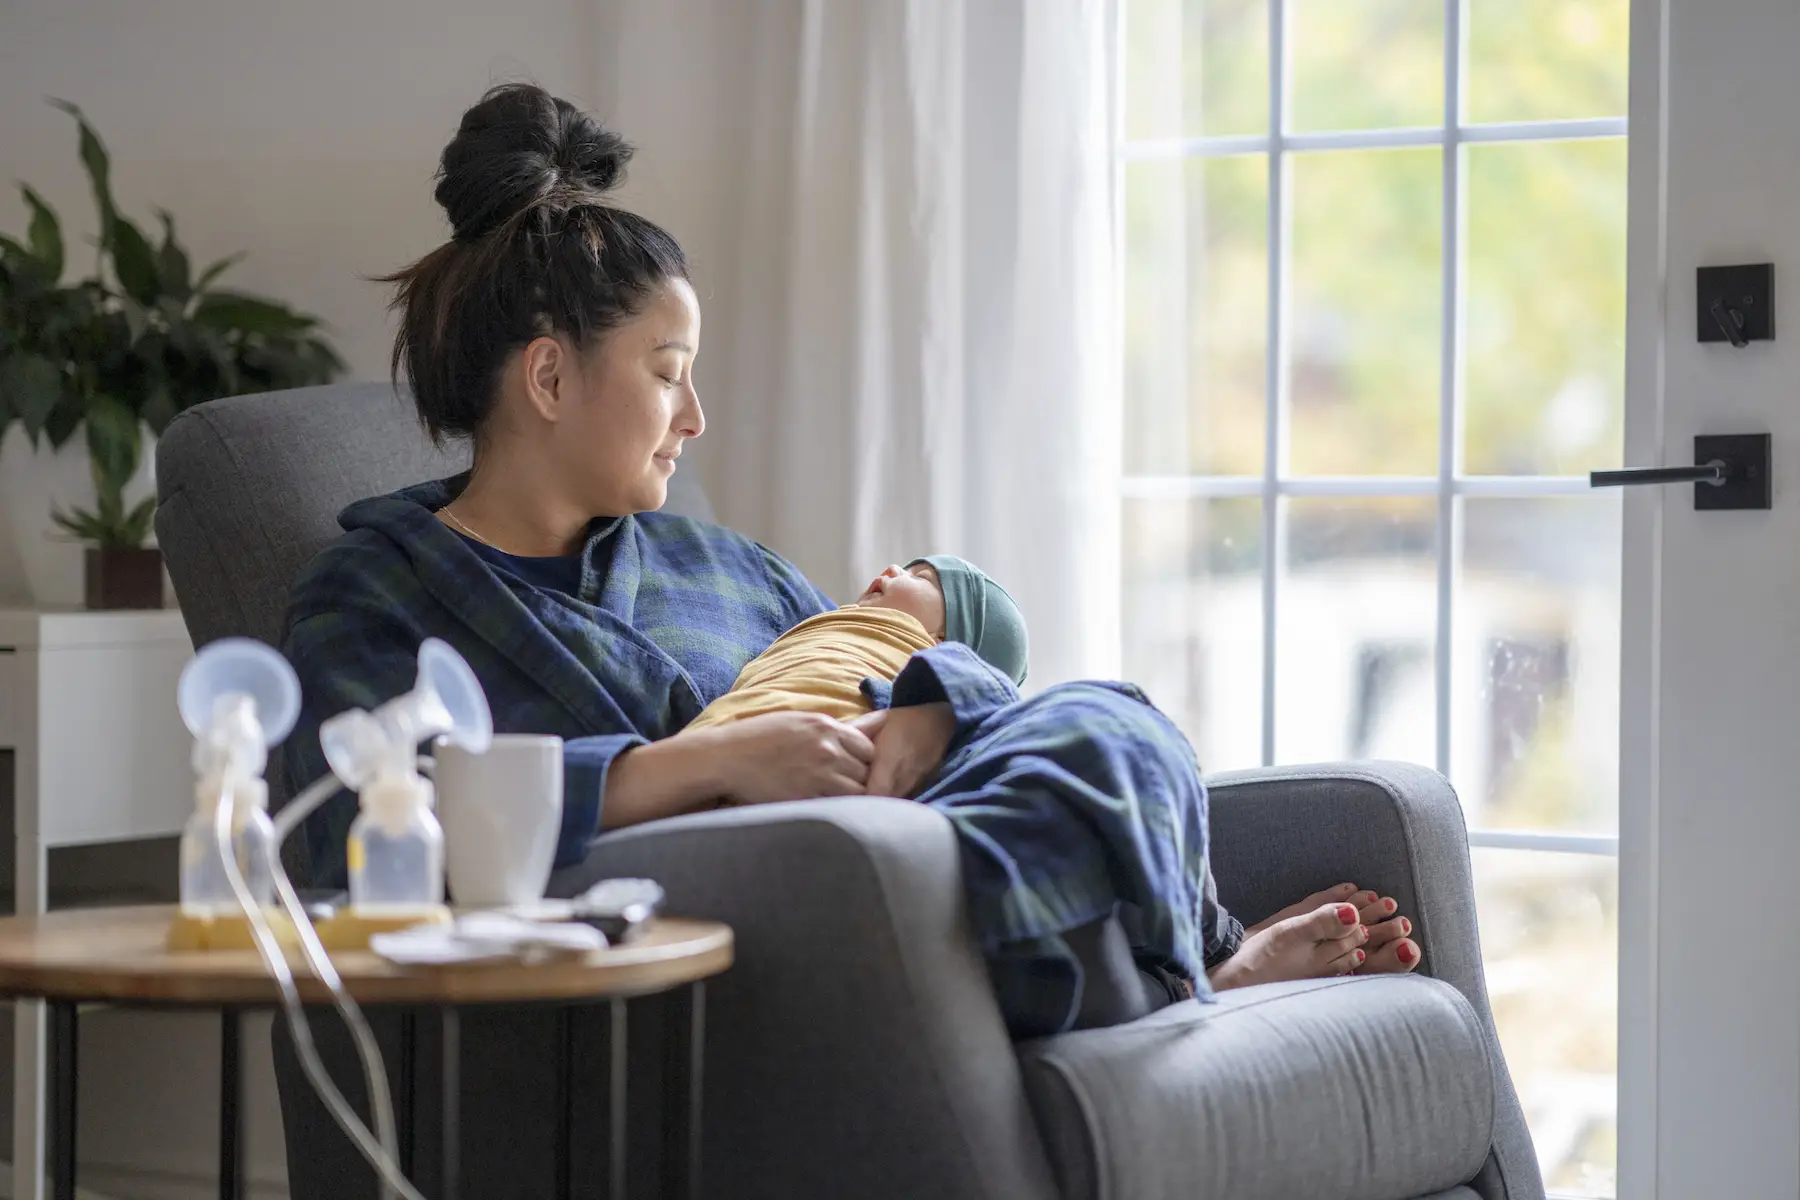 A new mother sitting on a rocking chair in her living room wearing a bathrobe, holding her newborn baby. 